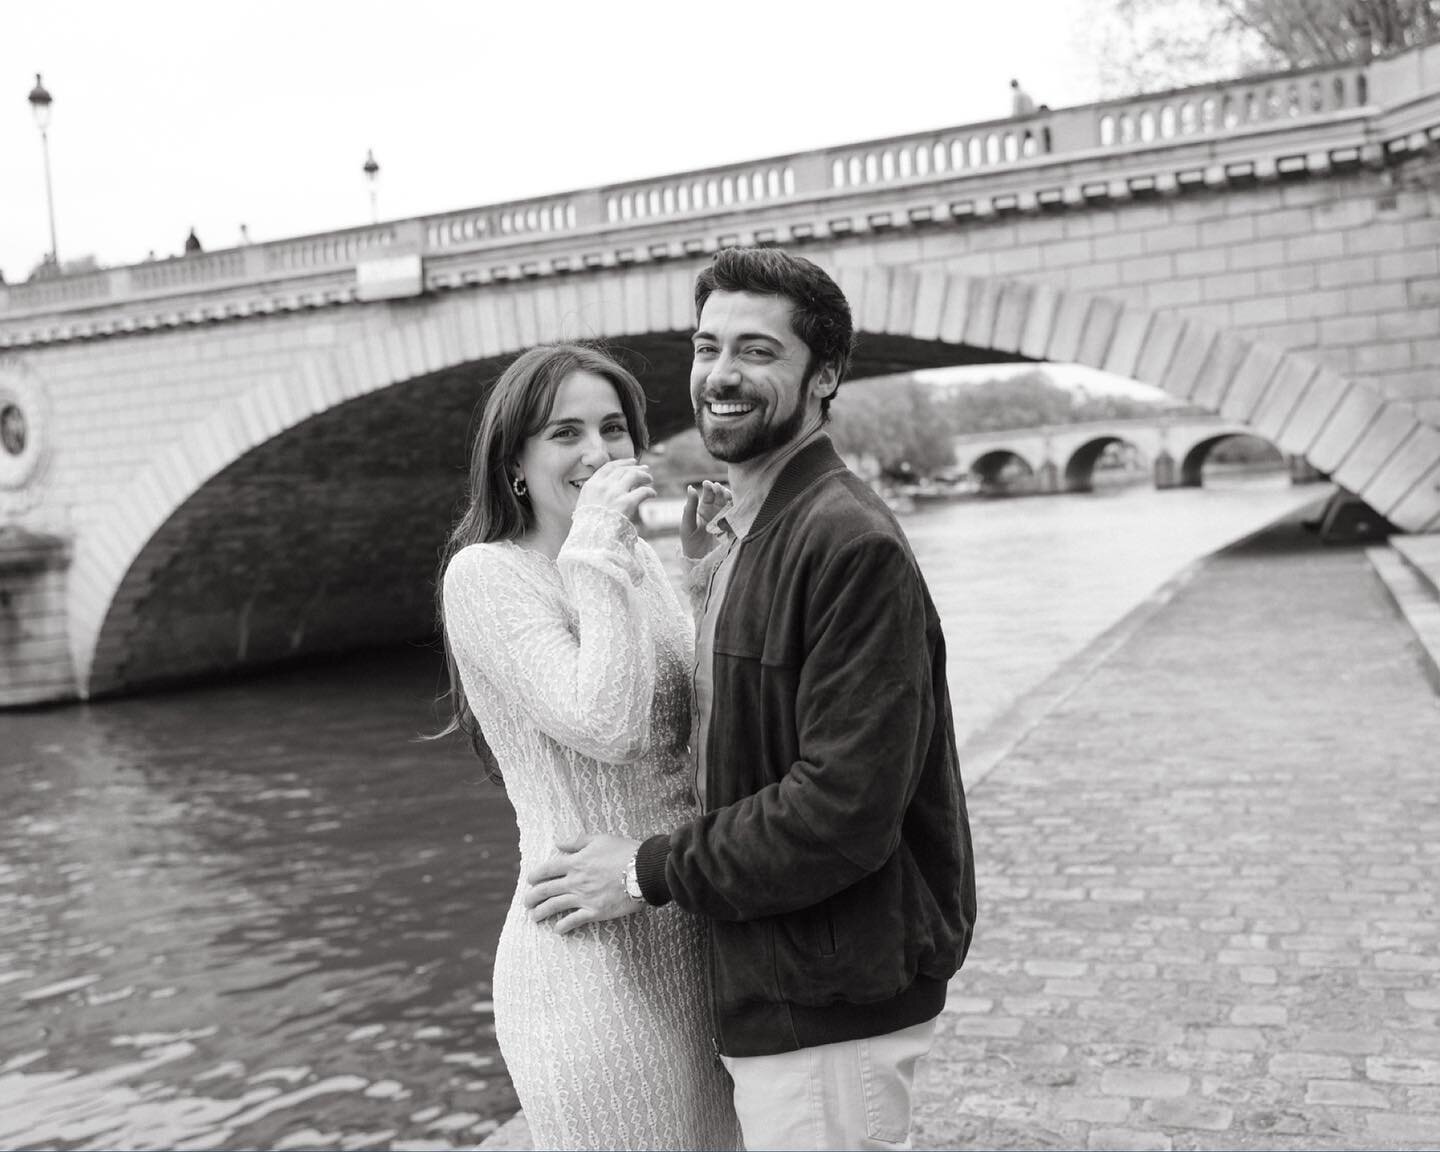 She&rsquo;s back from her honeymoon baby!! 
And while I was away I got to capture Megan and Sean in Paris, a dream come true. Swoon with me while we wait for the film scans of our afternoon to come back. 
-
#parisengagement #parisphotoshoot #parispho